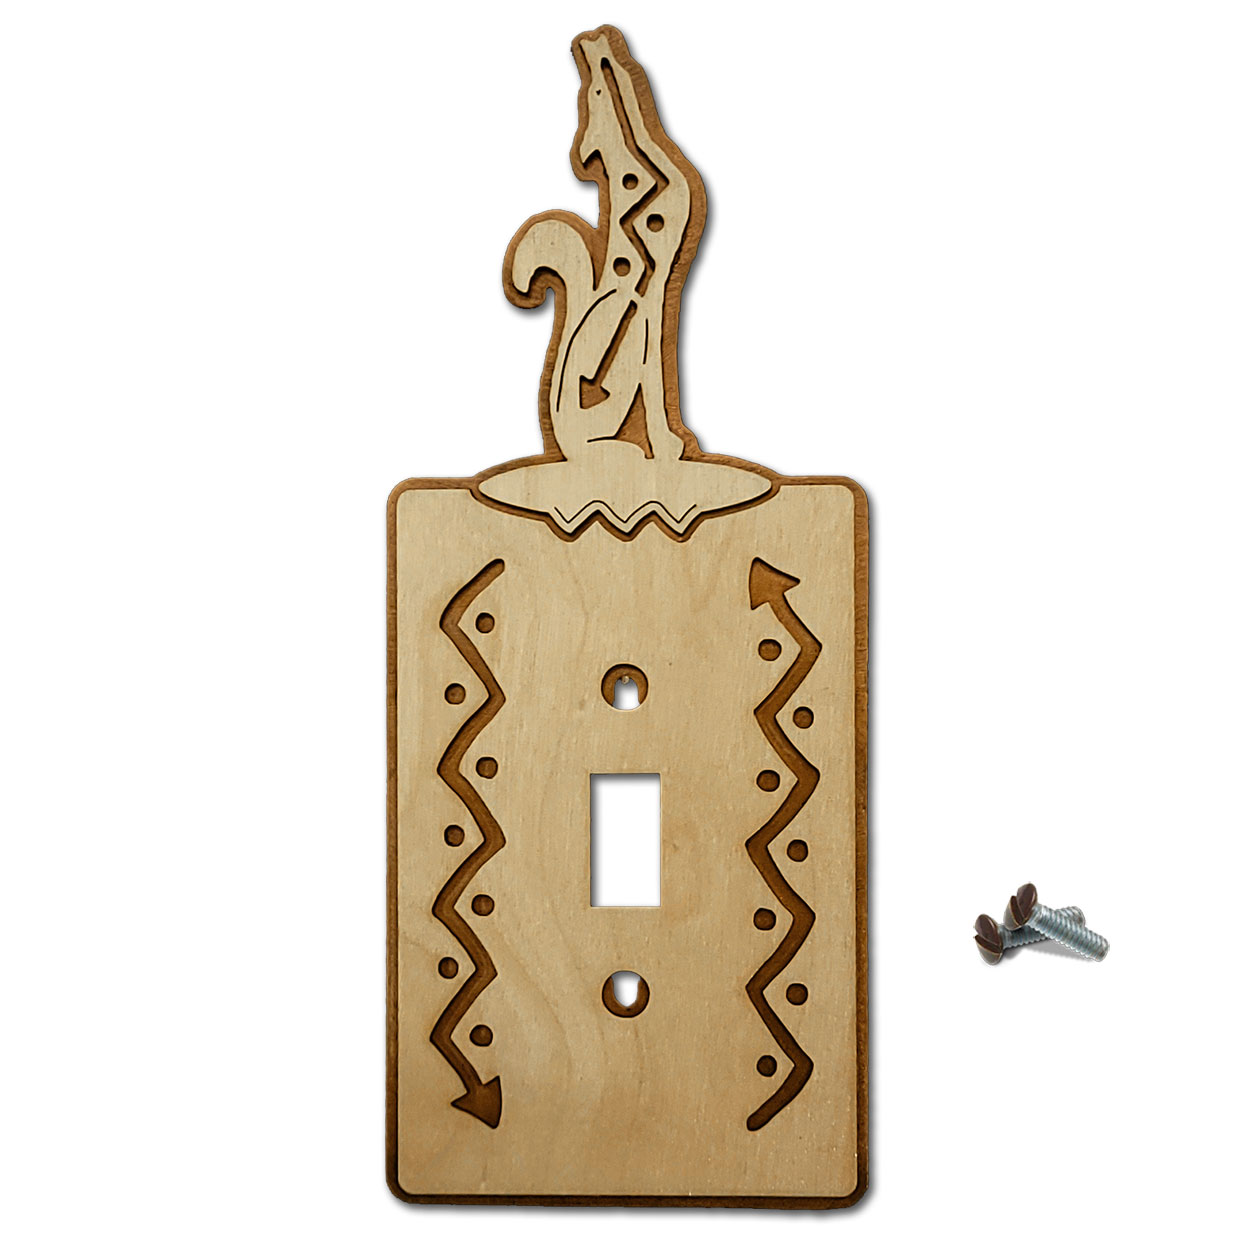 167211S - Southwest Coyote Southwestern Decor Single Standard Switch Plate in Natural Birch